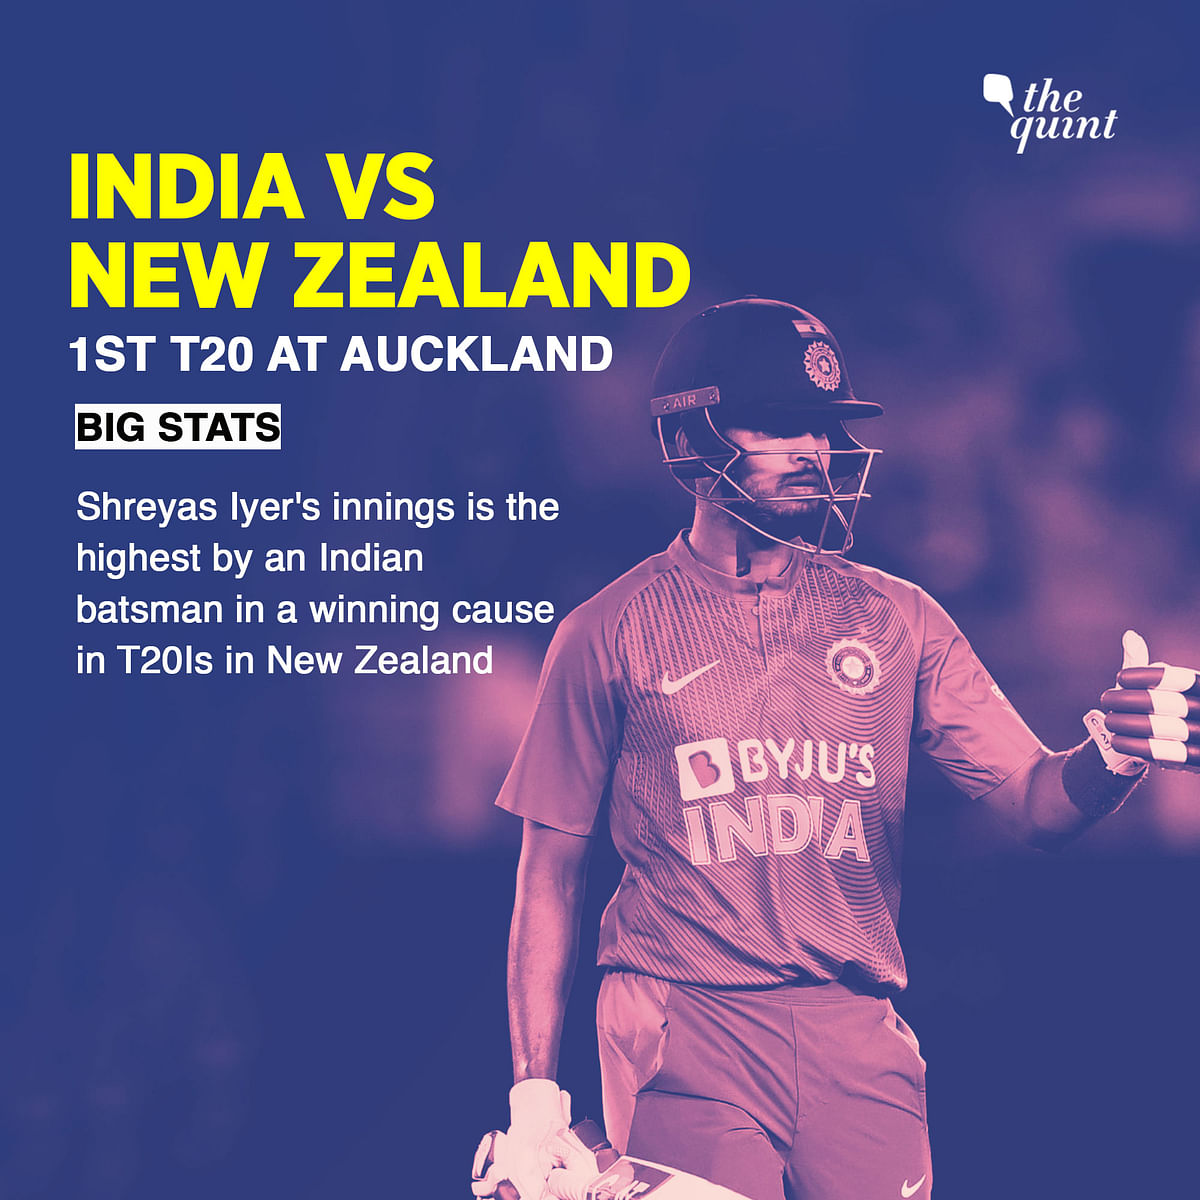 India’s total of 204 for four against New Zealand is their highest successful chase in overseas T20Is. 